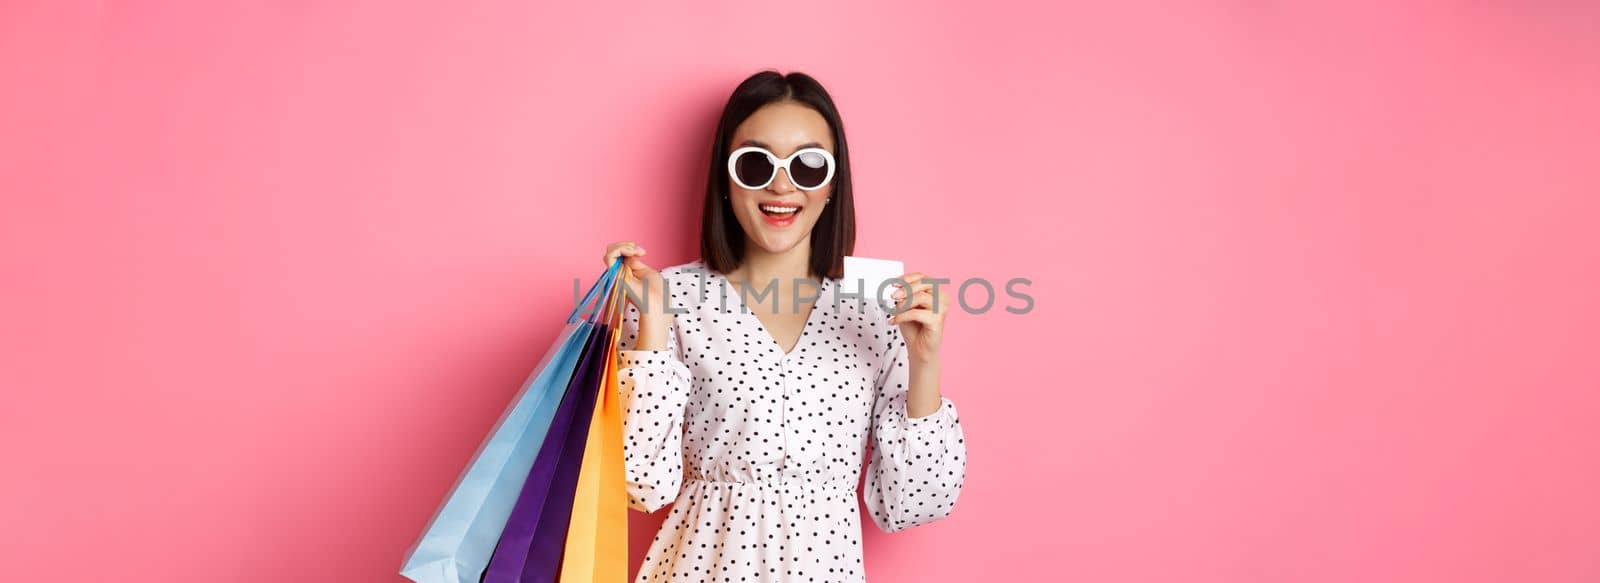 Beautiful asian woman in sunglasses going shopping, holding bags and showing credit card, standing over pink background.